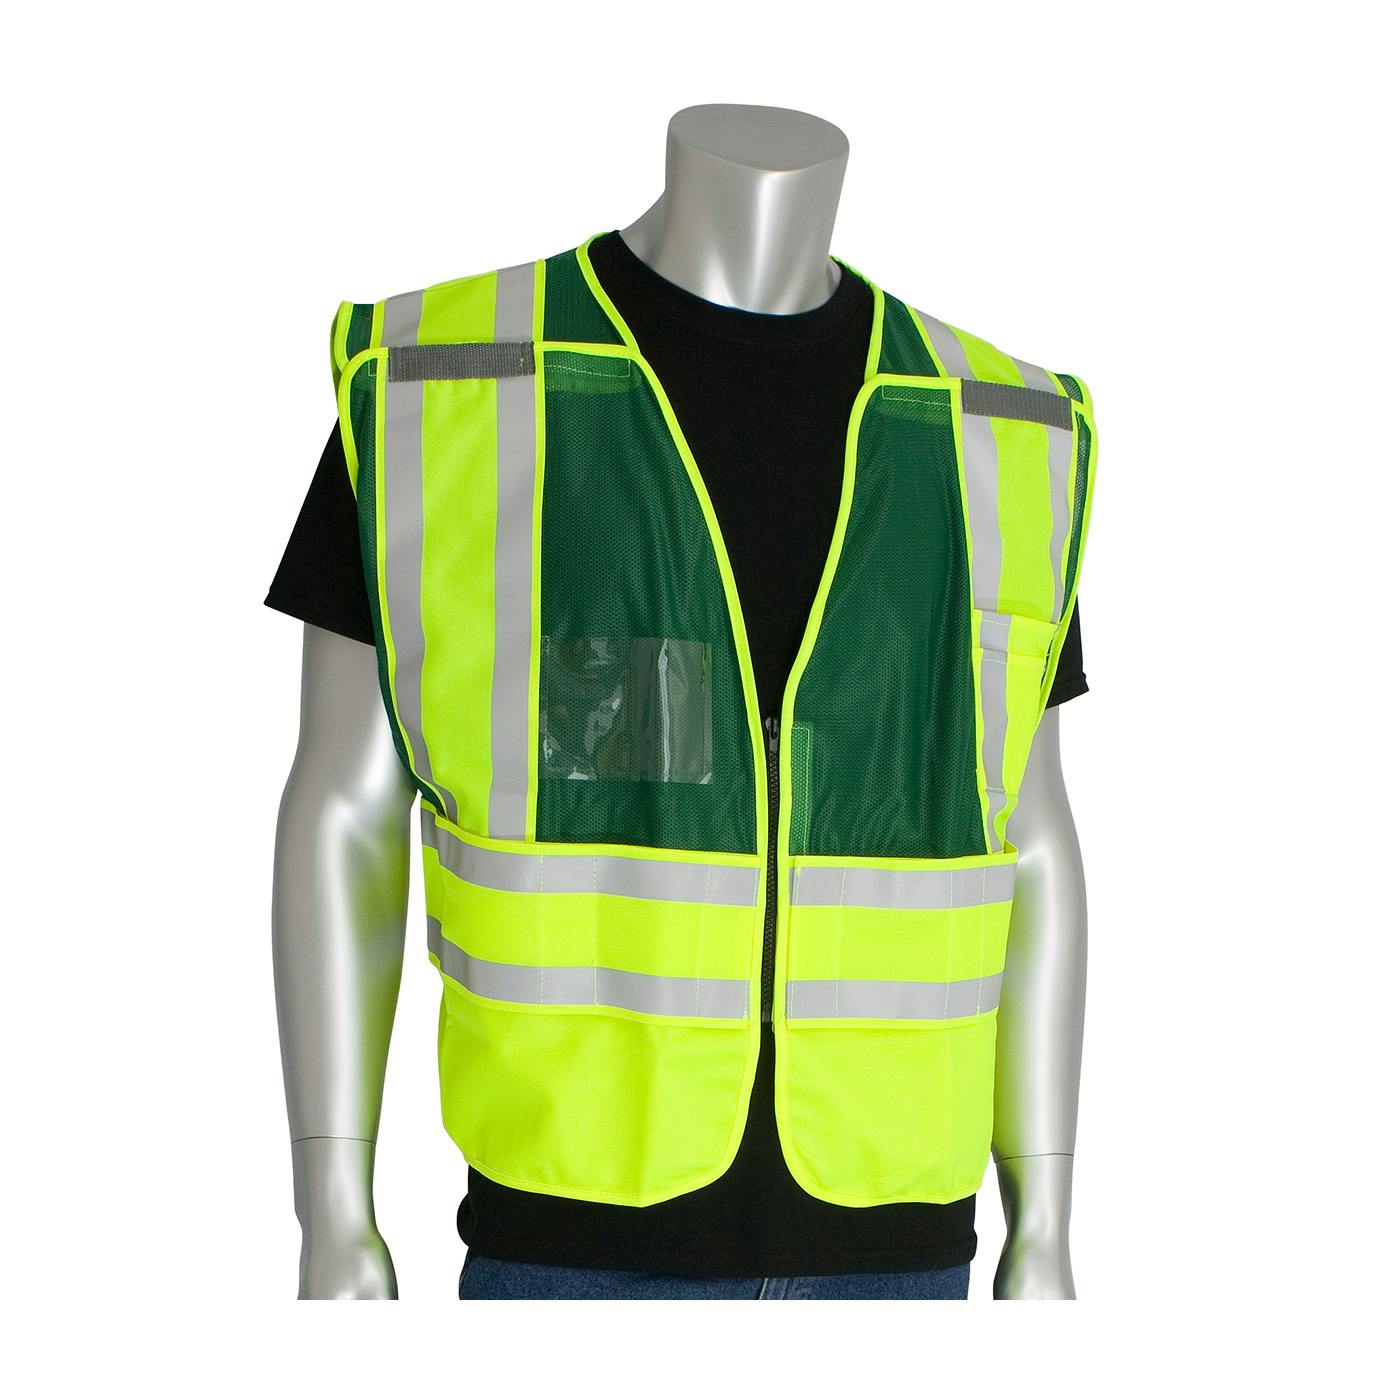 ANSI Type P Class 2 Incident Command Safety Vest, Green (302-PSV-GRN)_1